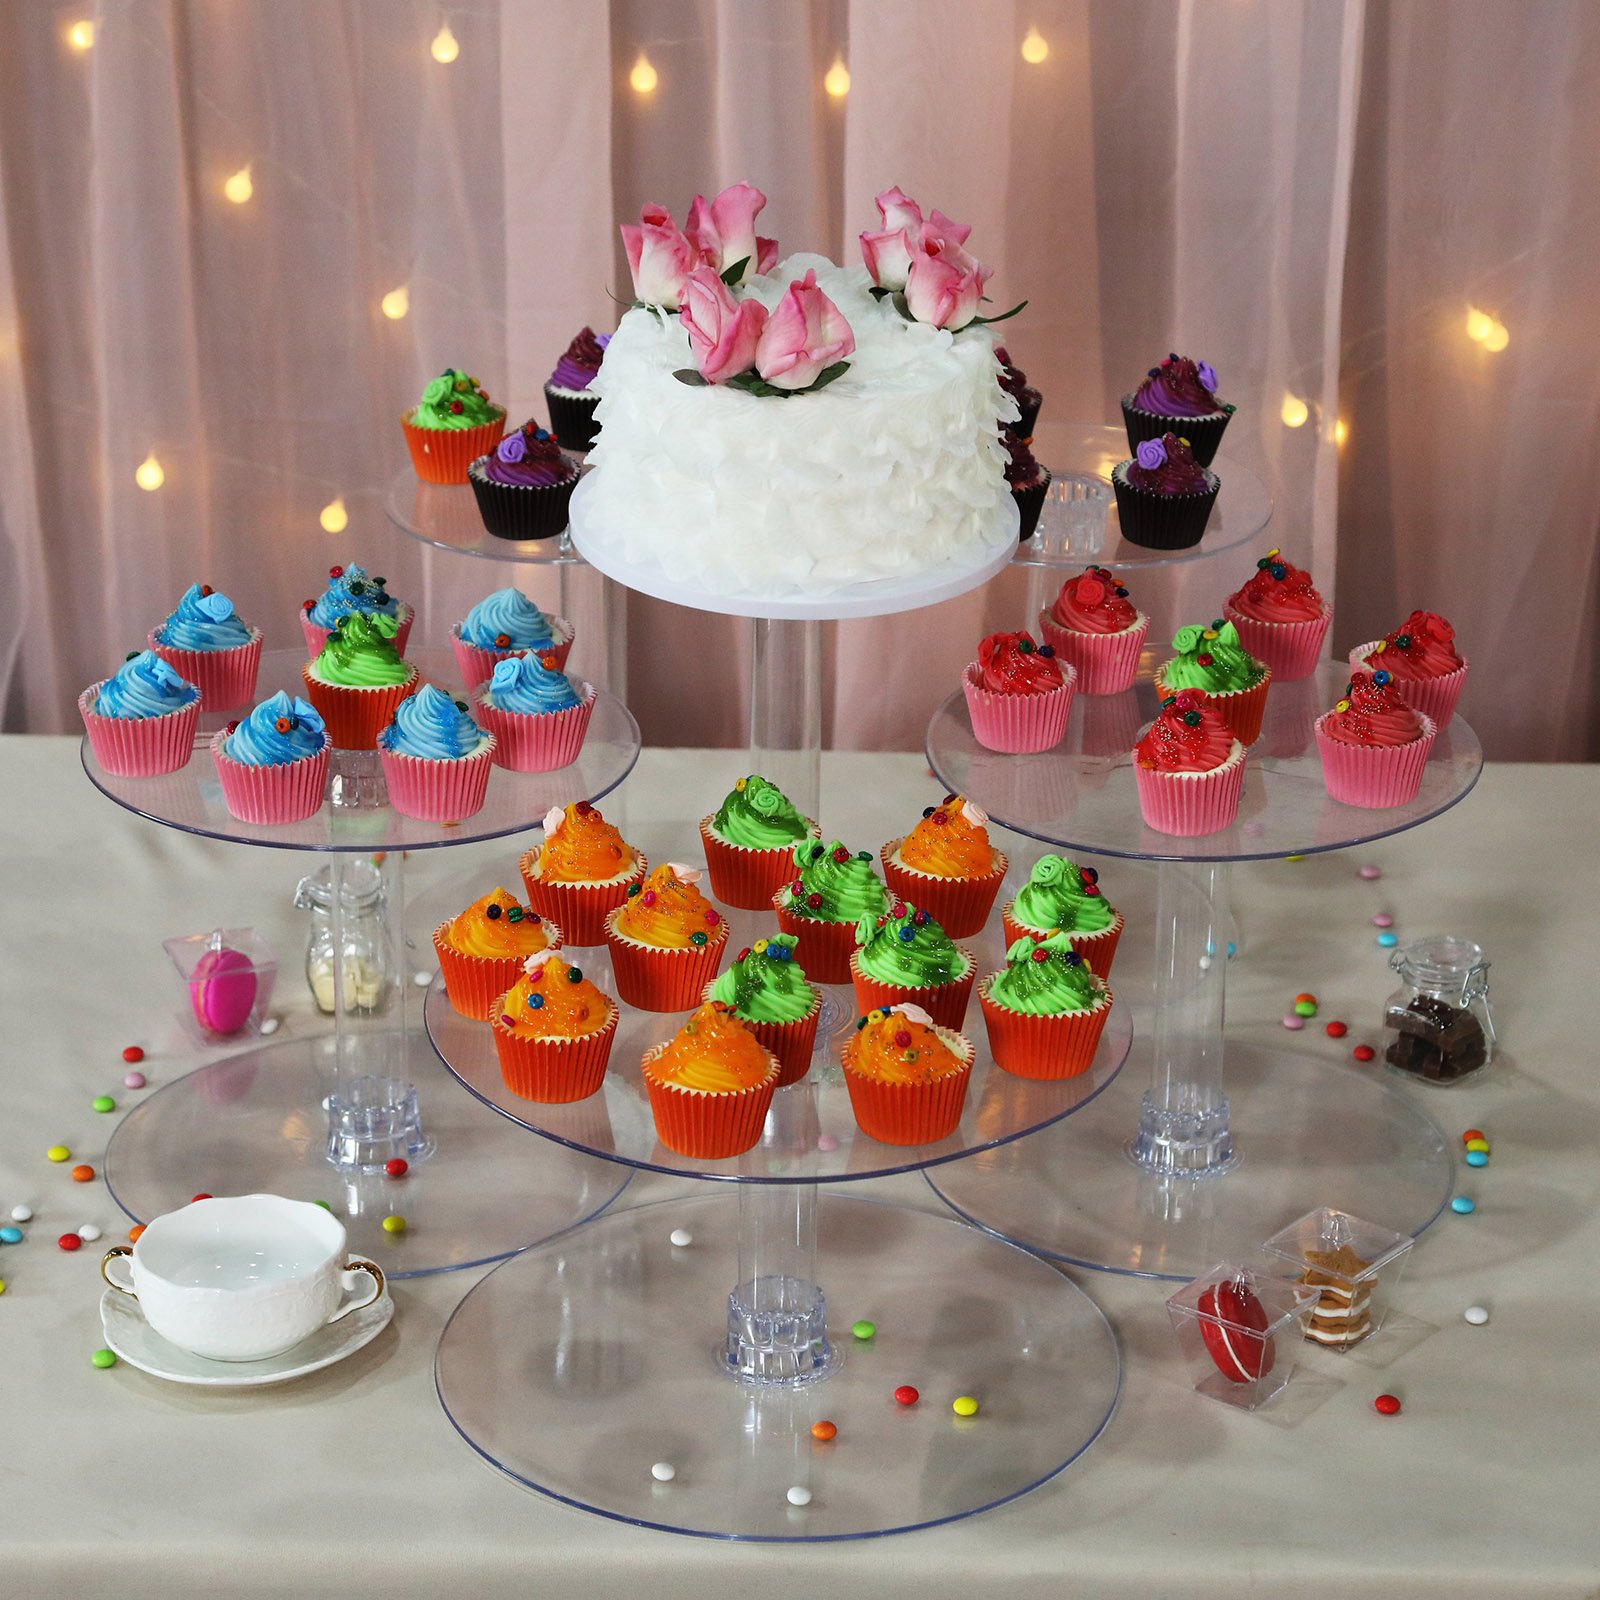 Buy 6 Tier Clear Acrylic Cupcake Cake Stand at Tablecloth